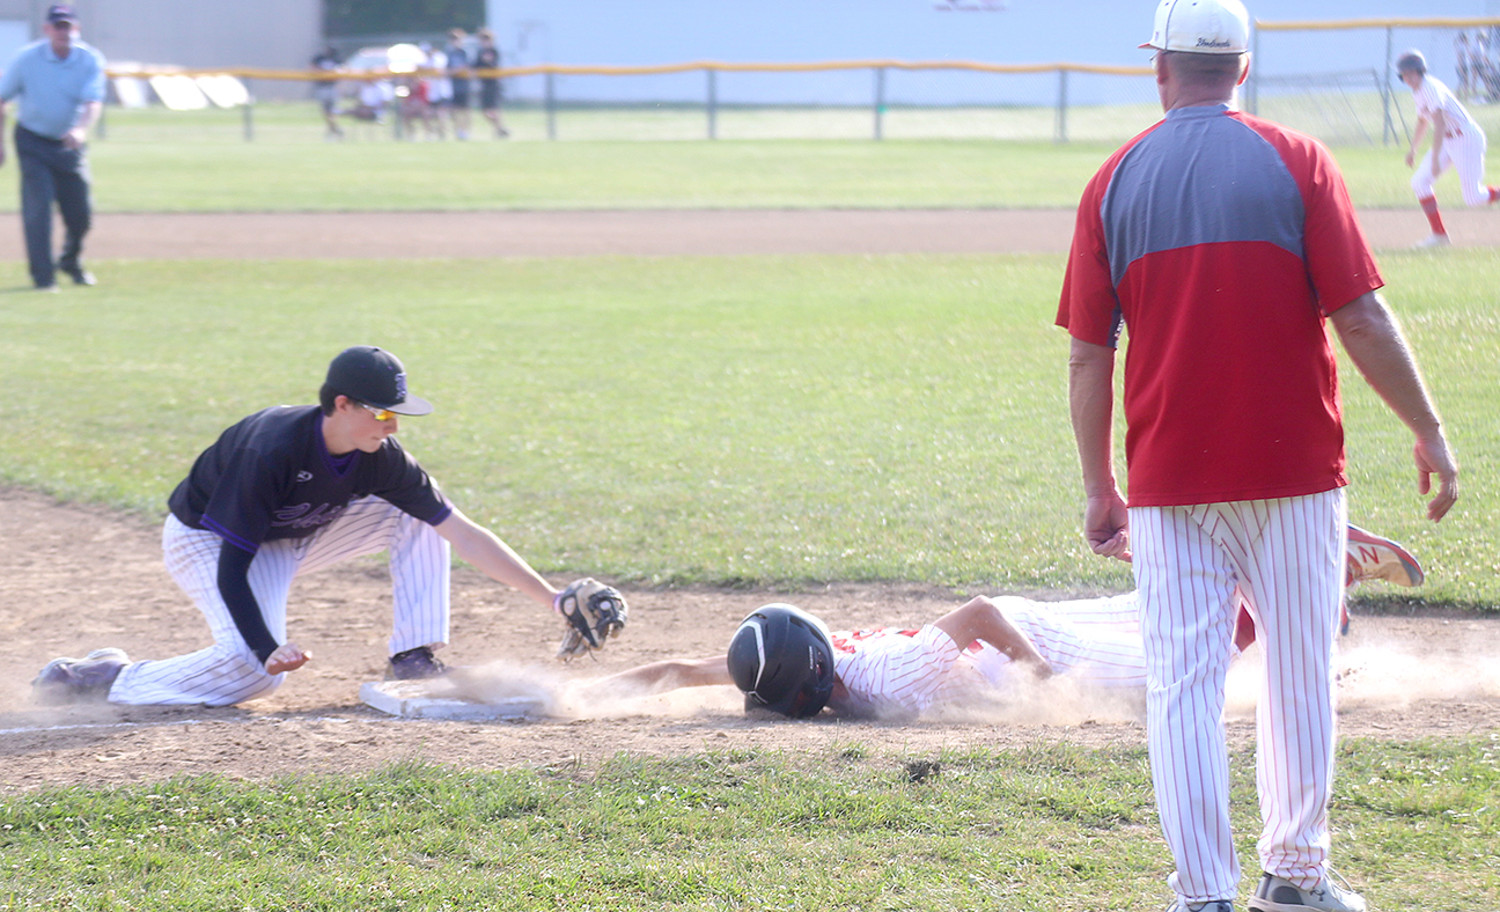 Fort Madison's Aiden Mitchell slides back into third safely after getting caught leaning on a pick-off attempt as Head Coach Ron Walker looks on from the third base coach box. The Hounds swept Keokuk 11-1, 5-1 in a doubleheader Monday night. Photo by Chuck Vandenberg/PCC